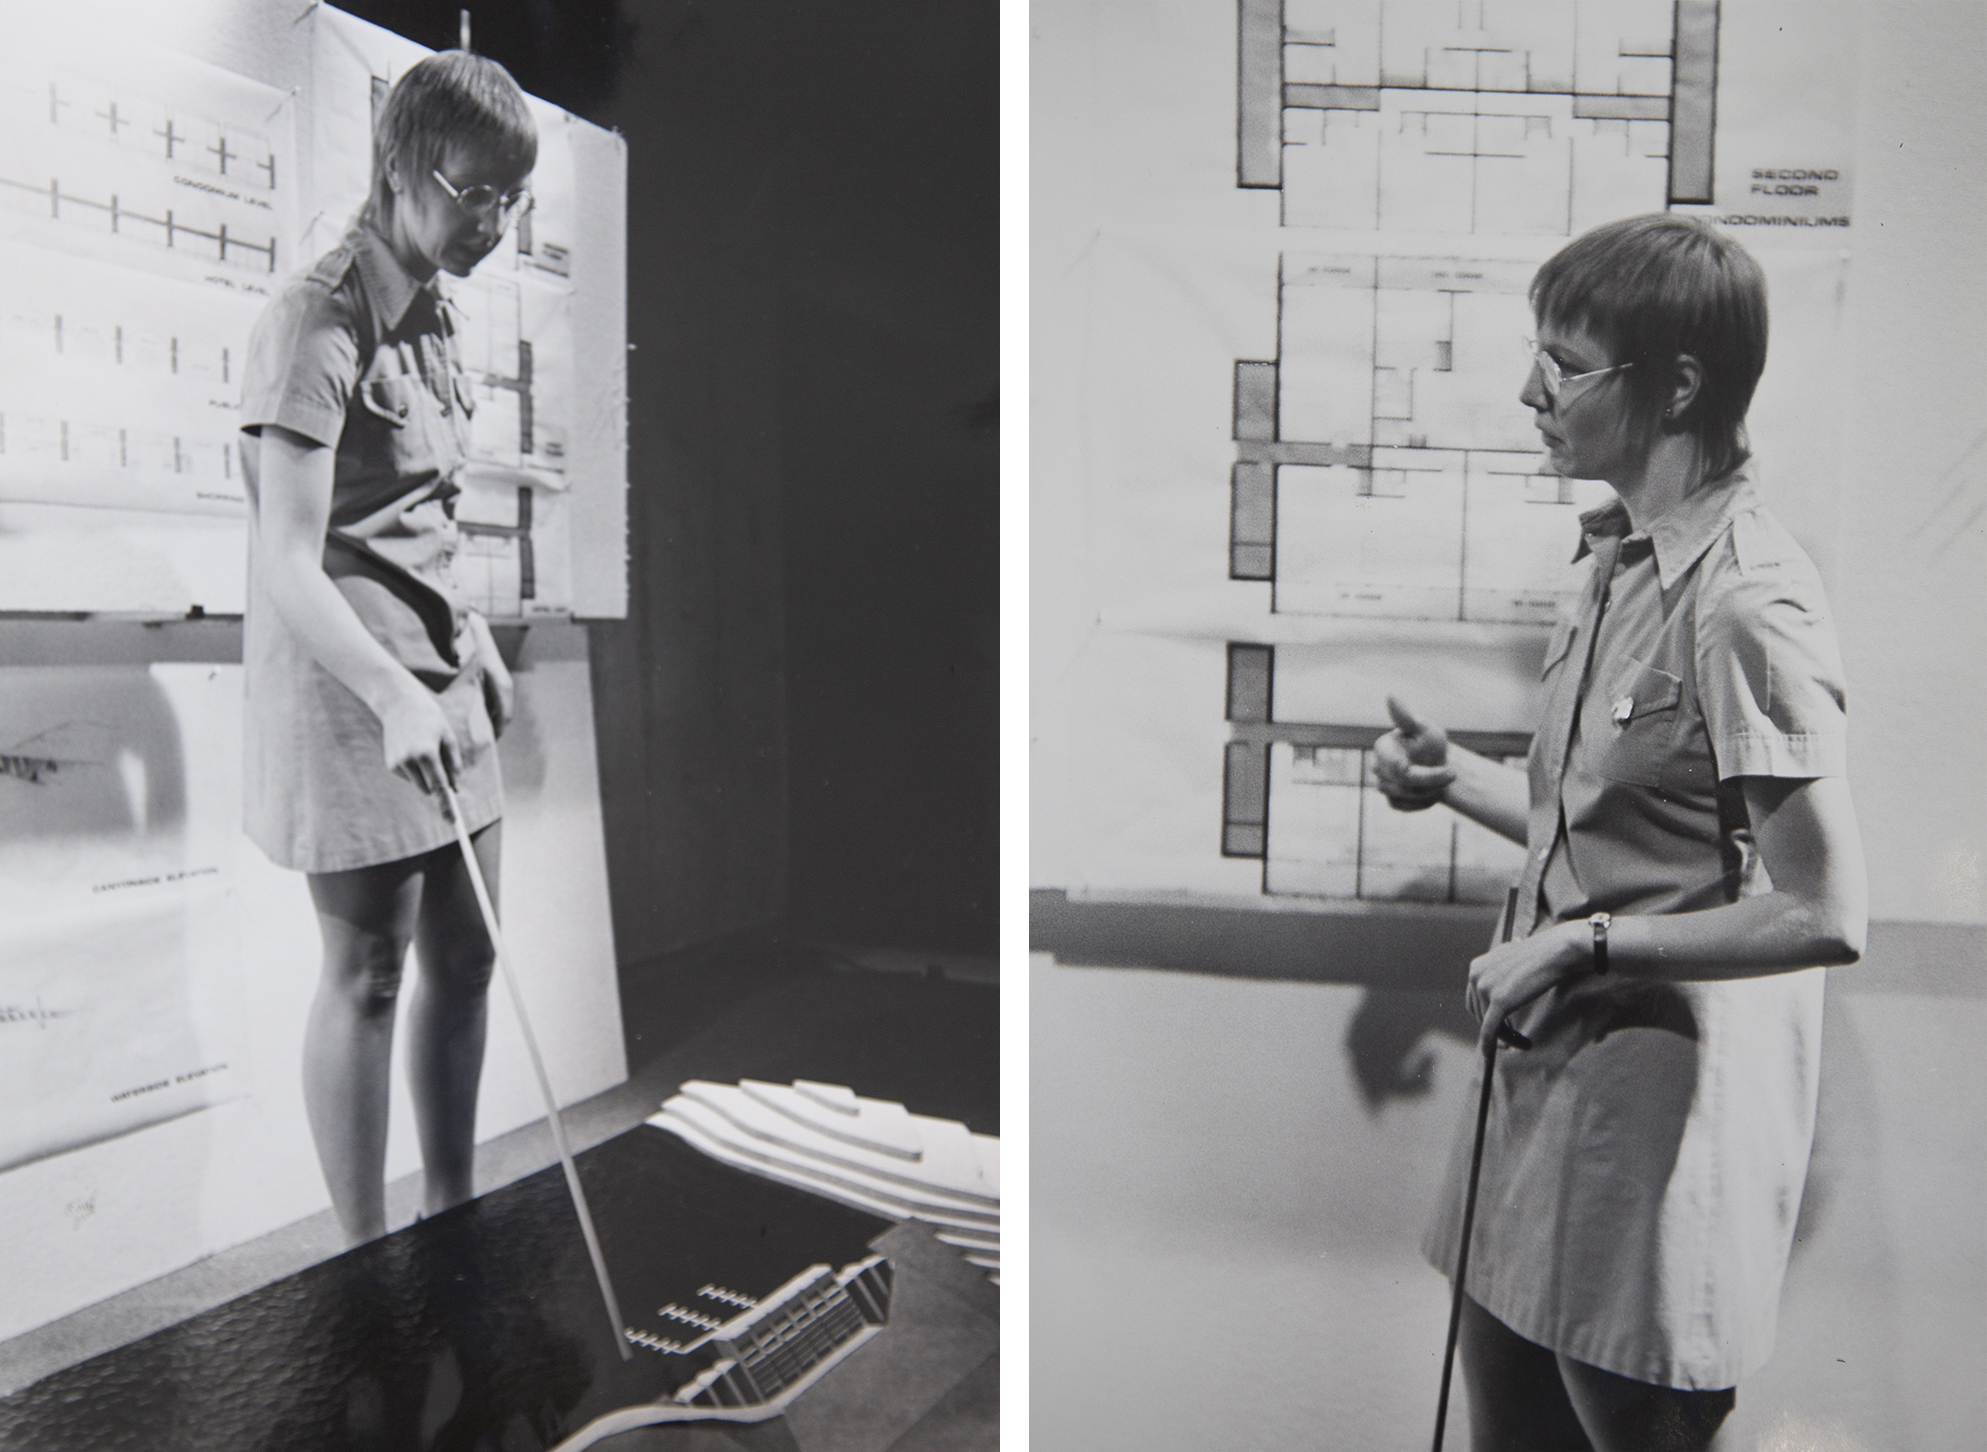 L and R: Department of Architecture student Susan Morris defends project before faculty jury, 1972. University of Utah Archival Photograph Collection P0305, D-Architecture, Folder 2, No. 9. Special Collections, J. Willard Marriott Library, the University of Utah. 